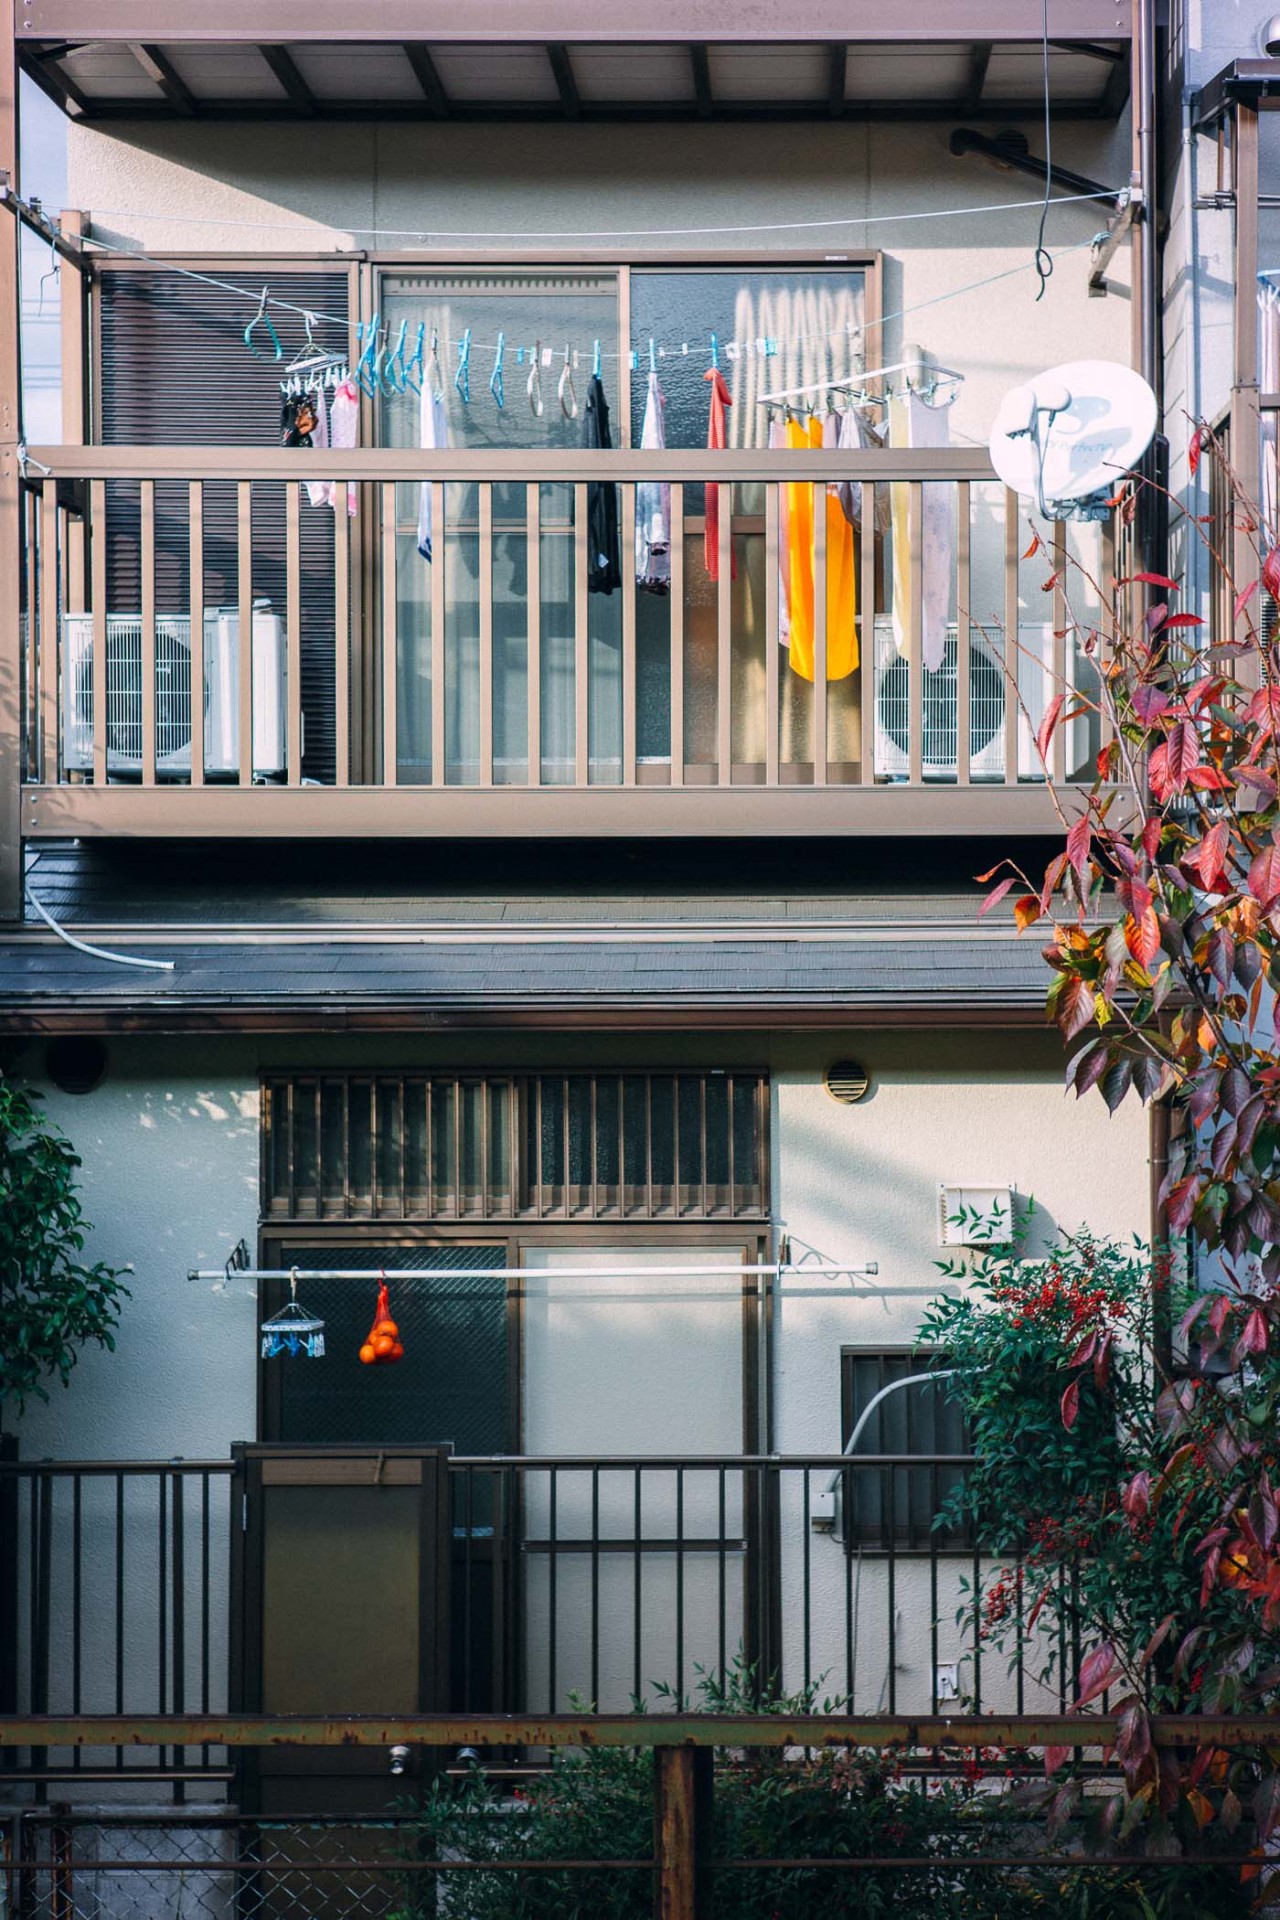 There is something inherently adorable about Japanese houses.
Kyoto, November 2019
Instagram | YouTube